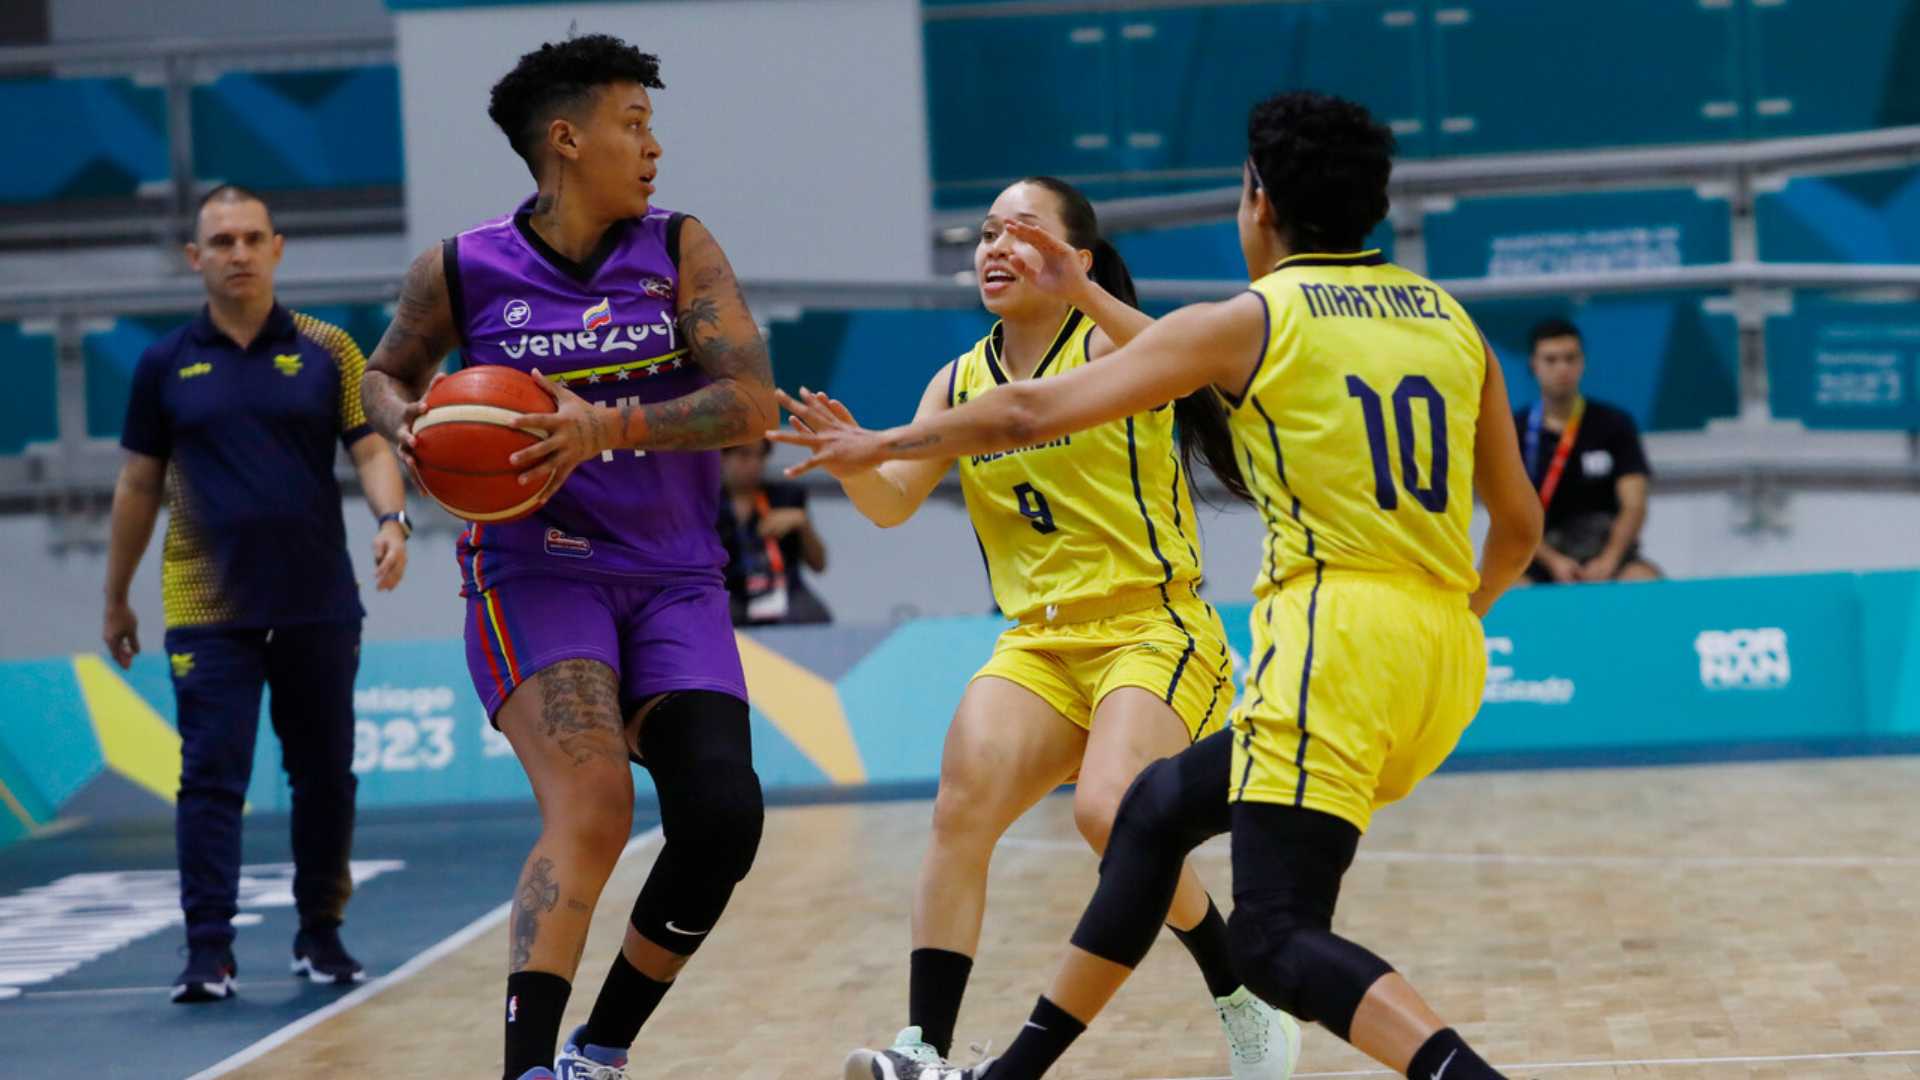 Female basketball: Colombia debuts with solid triumph against Venezuela